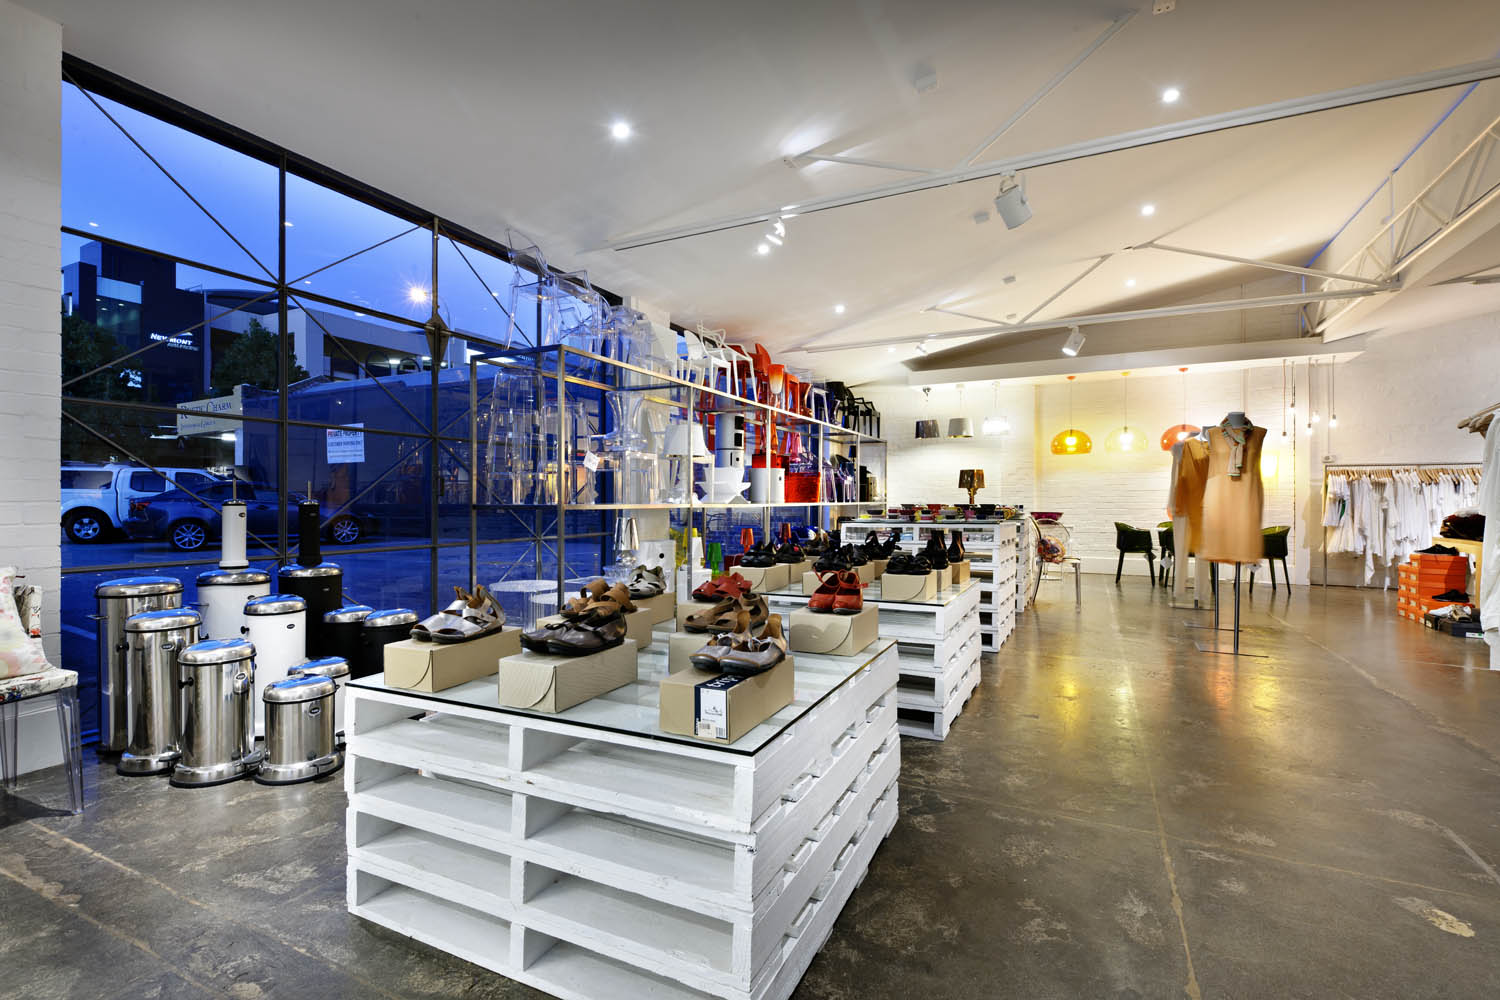 ricarda-subiaco-architectural-clothing-store-architecture-architect-design-designer-western-australia-commercial-interior.jpg